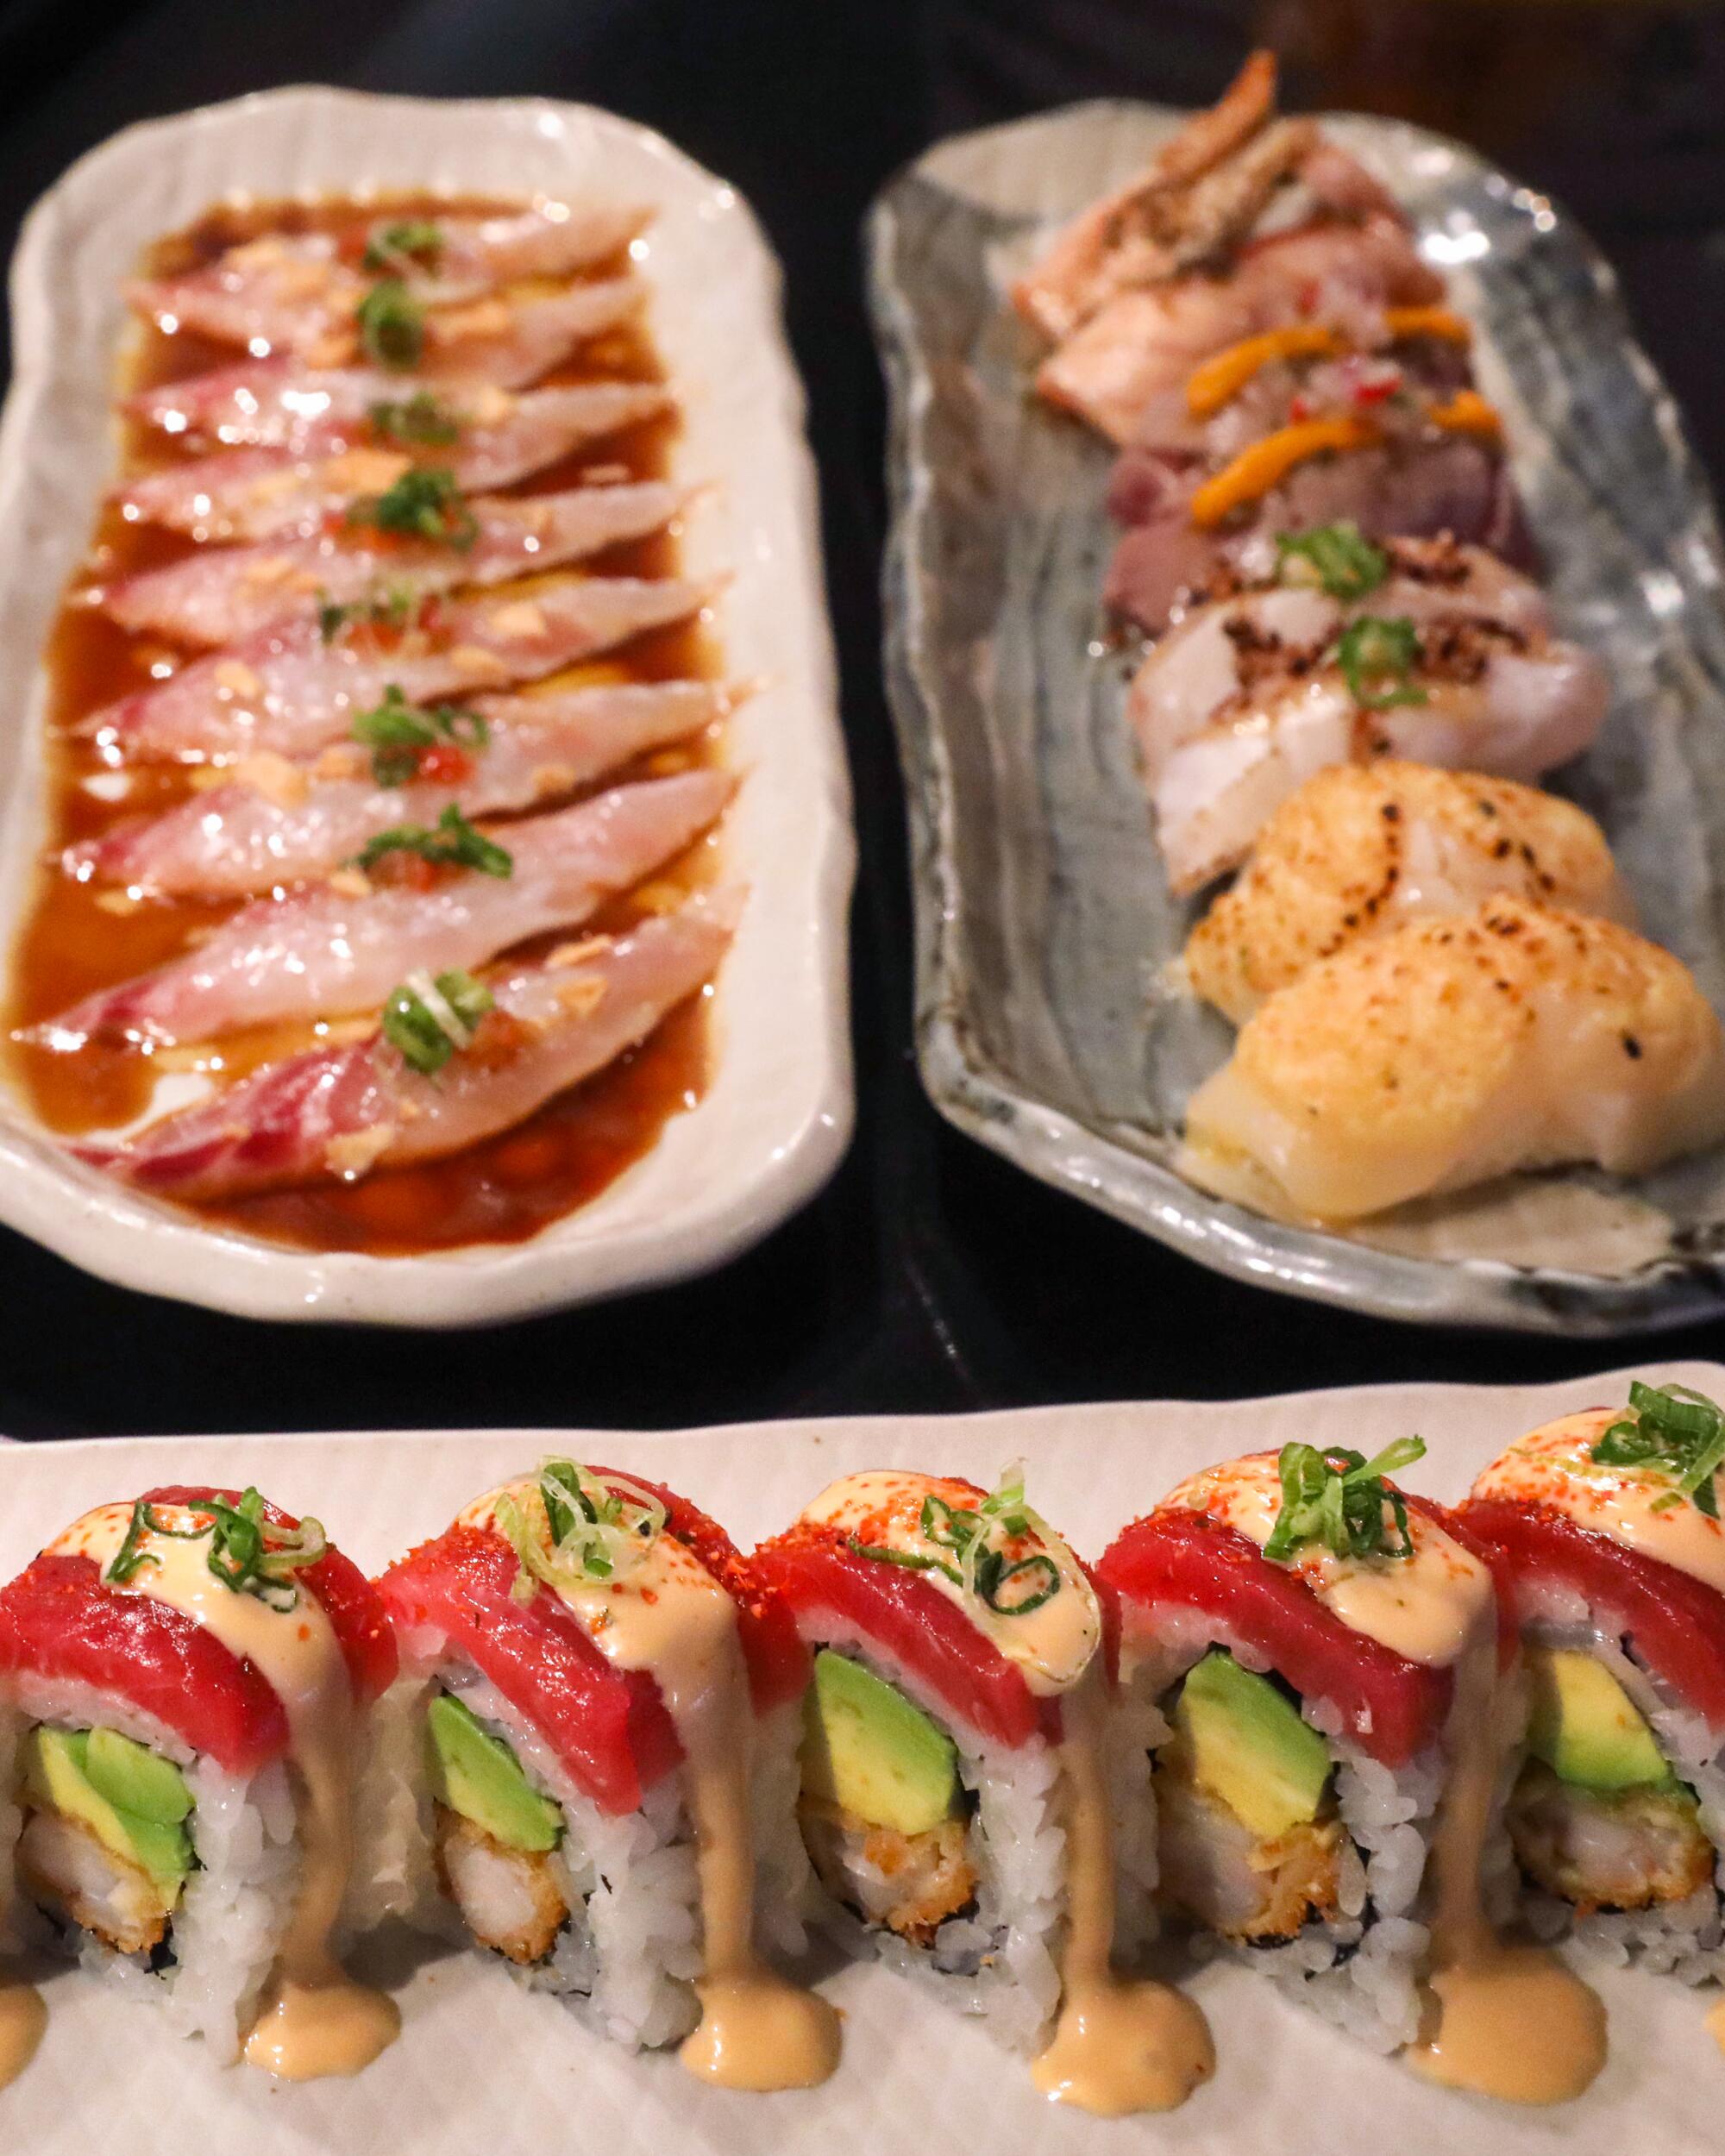 A variety of sushi dishes from Sushi Nikkei.